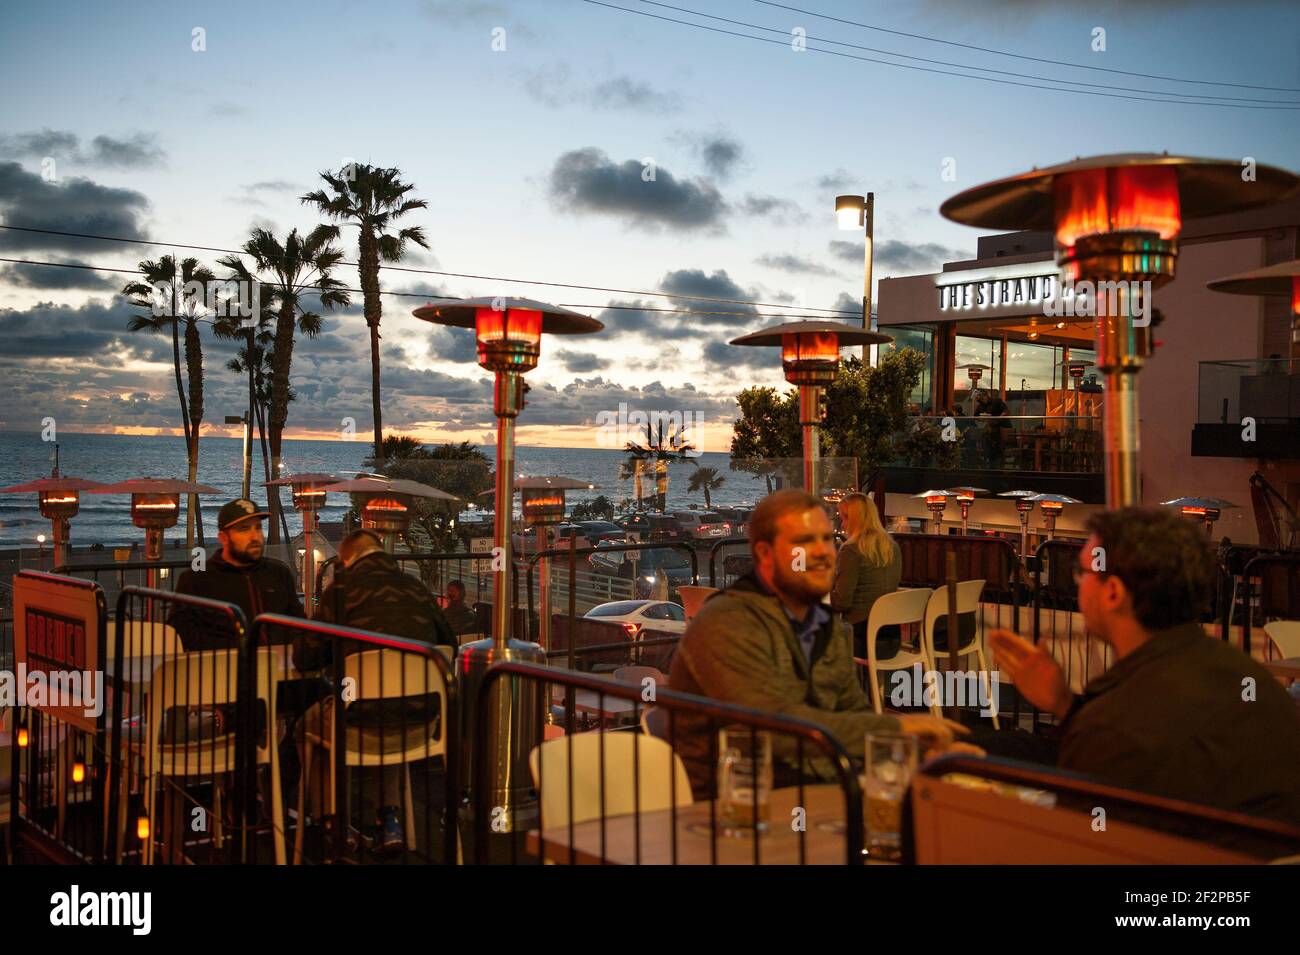 People dining outside at Manhattan Beach, CA at sunset Stock Photo